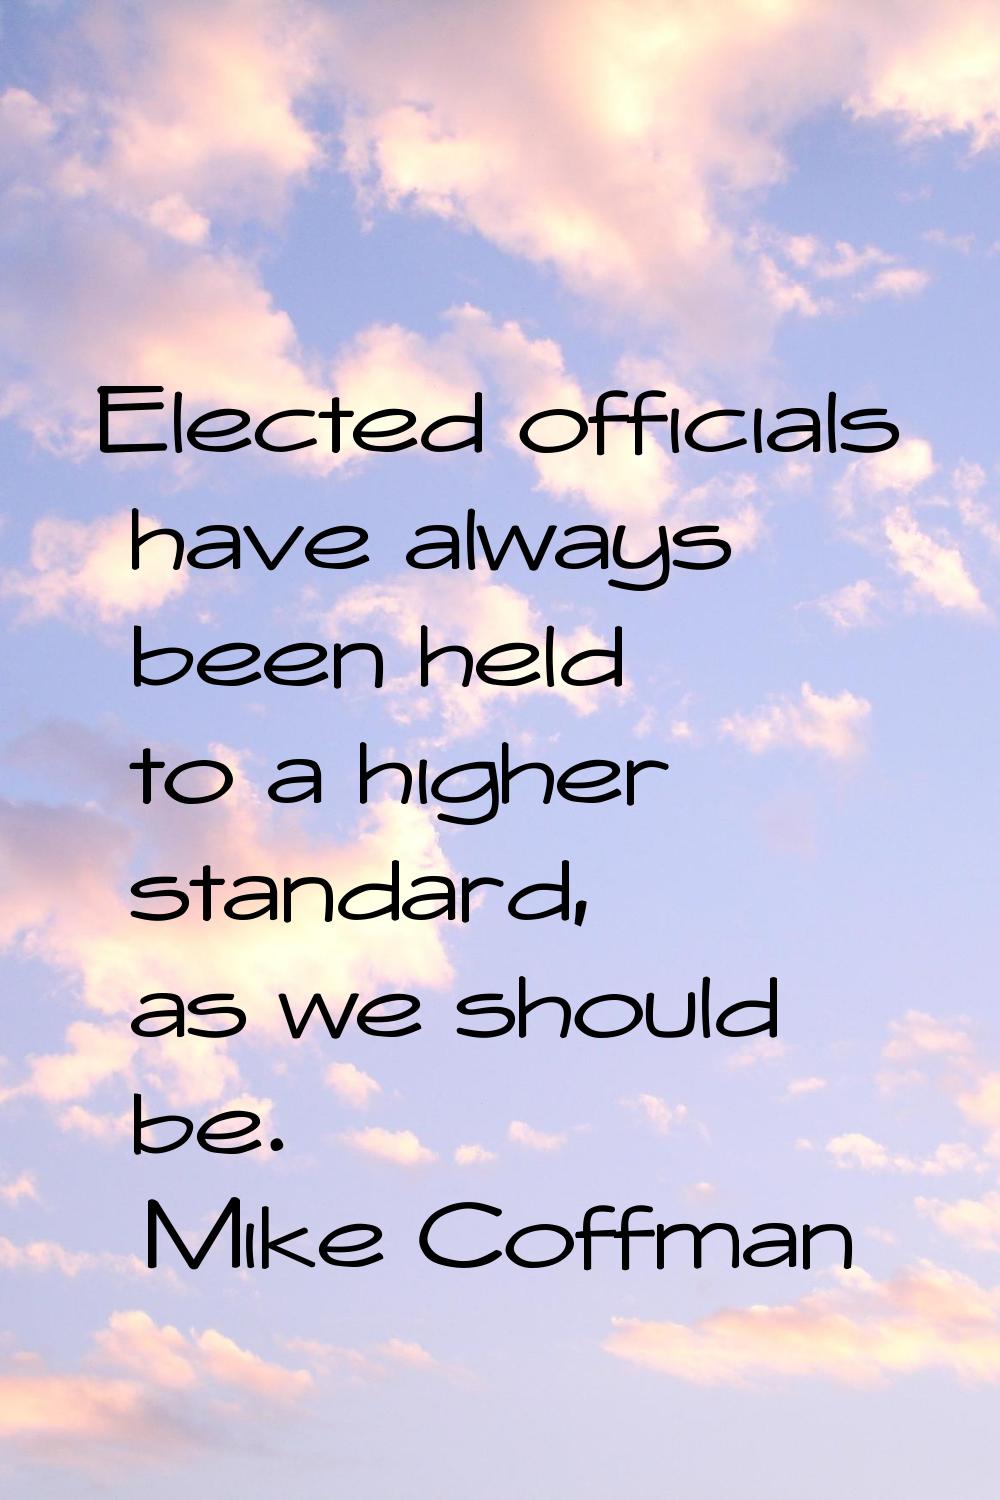 Elected officials have always been held to a higher standard, as we should be.